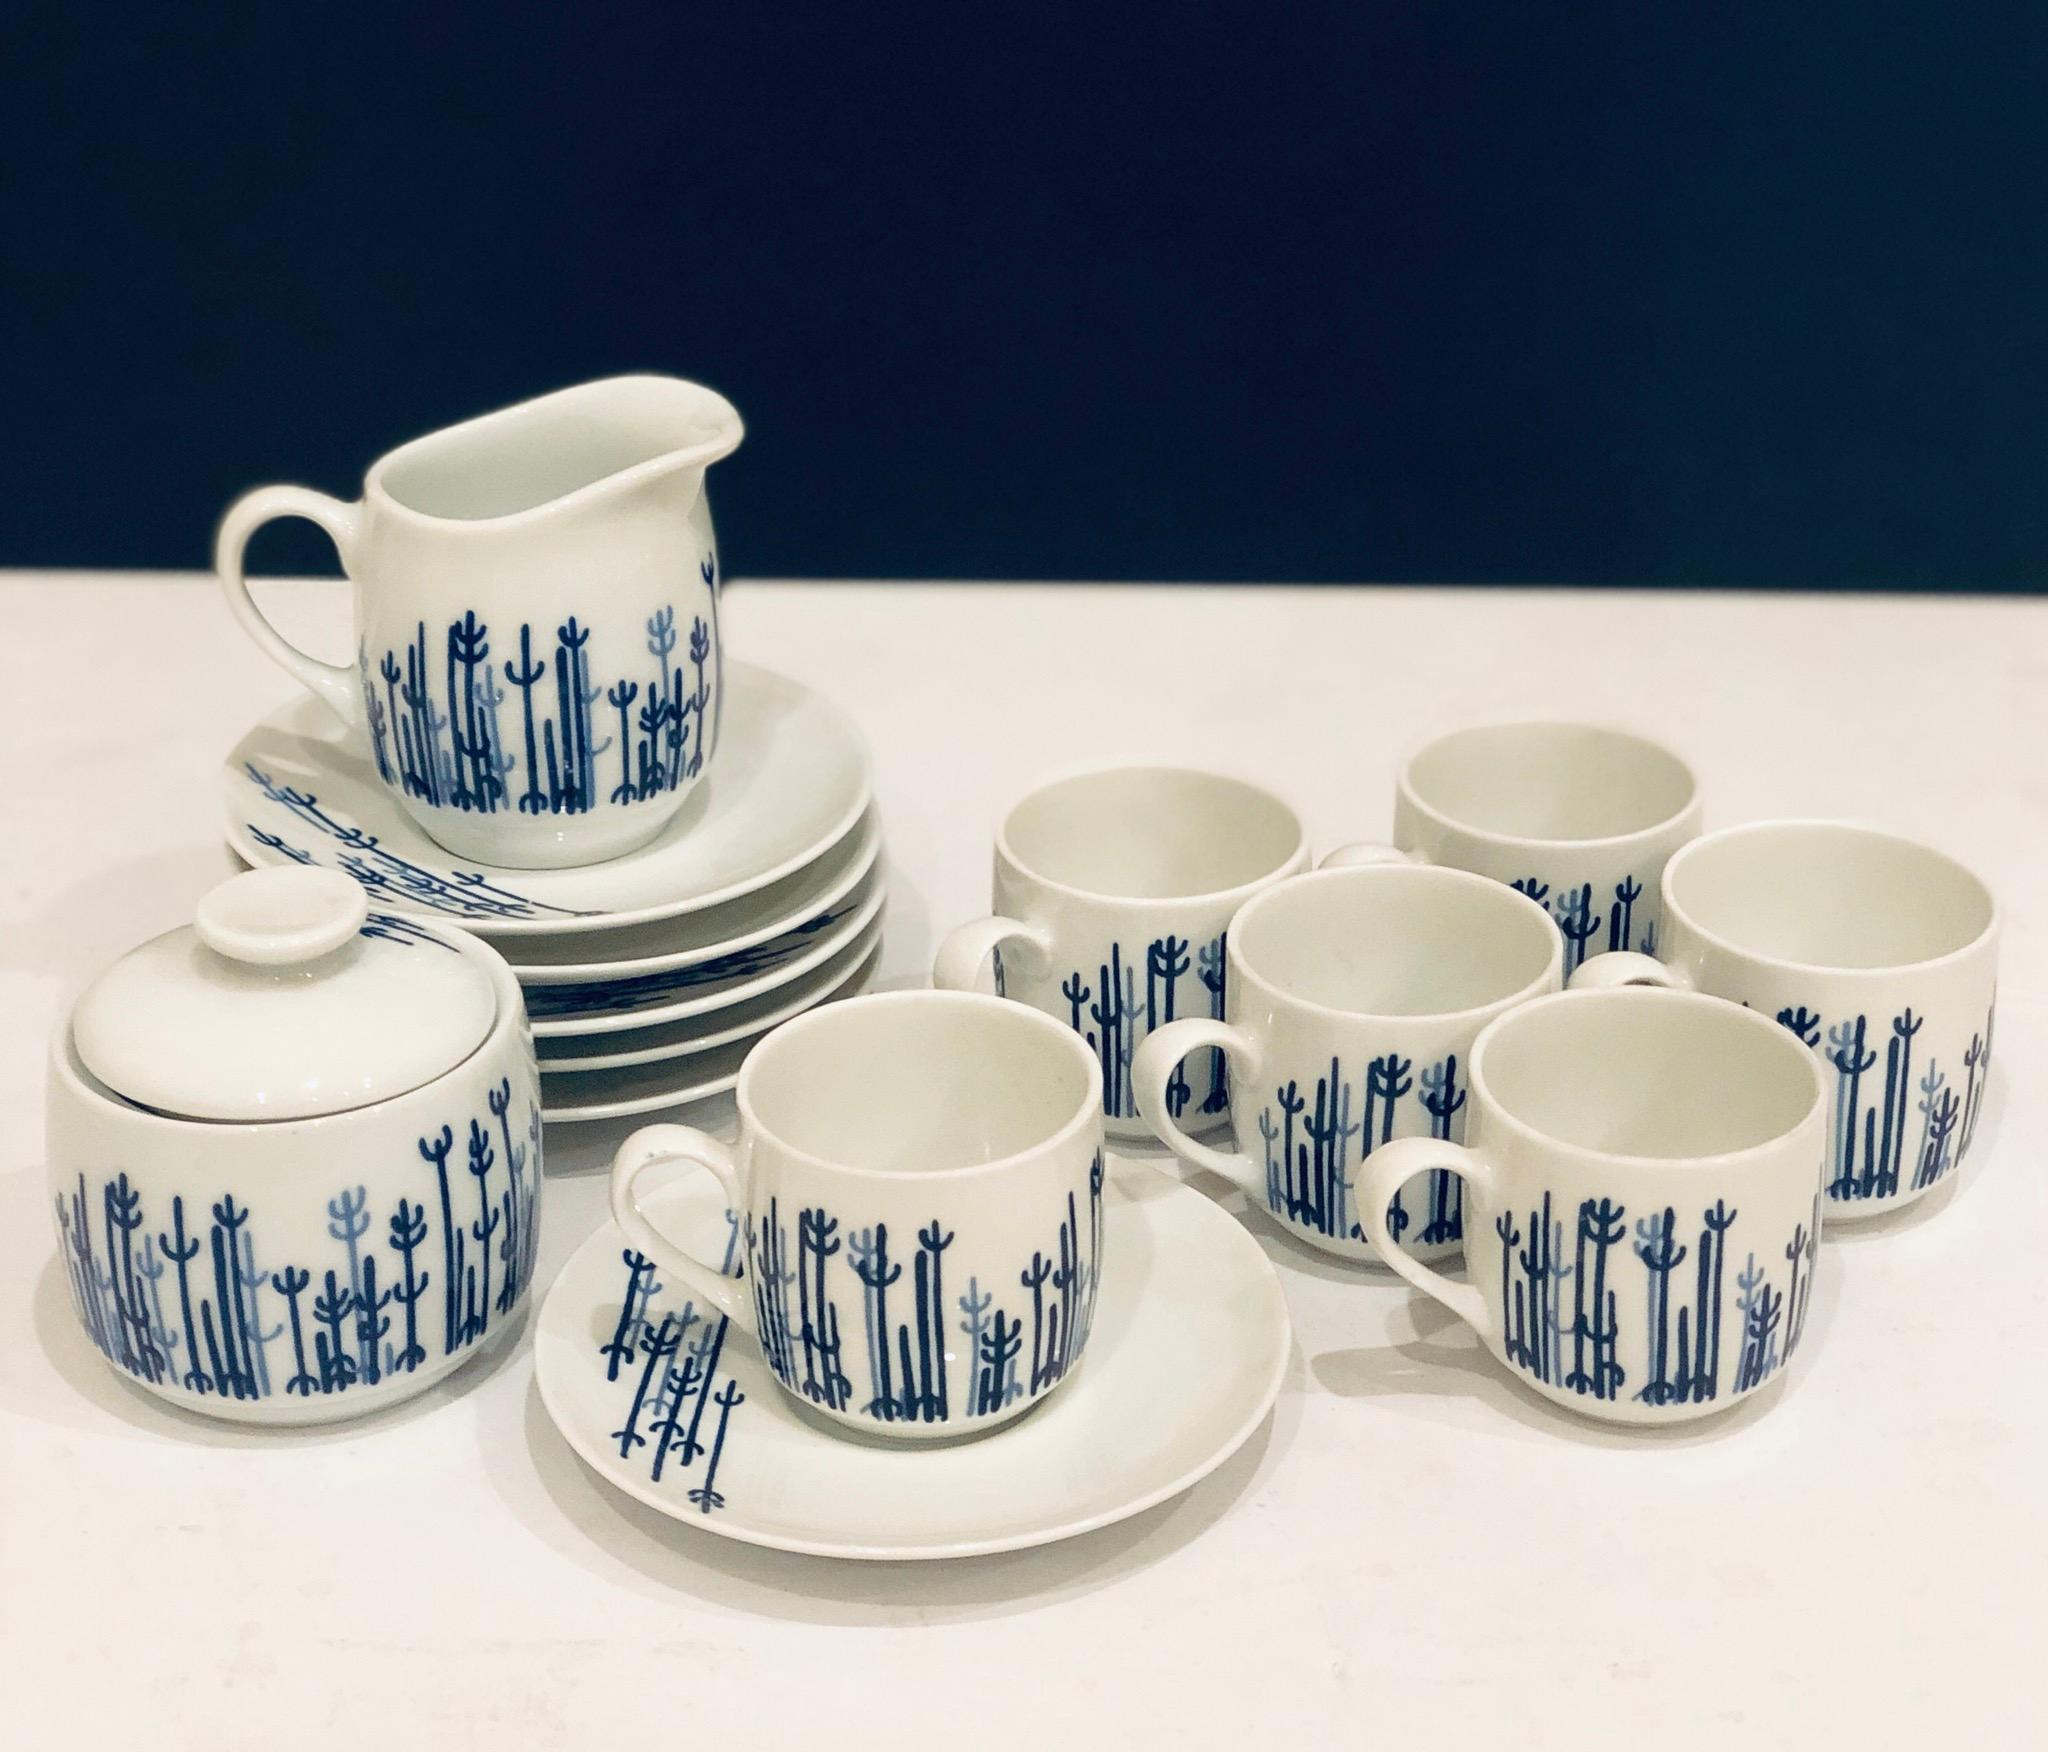 Beautiful set of 6 cups, 6 saucers sugar and creamer, in porcelain by Richard Ginori Italy, in great condition no chips or cracks beautiful design.